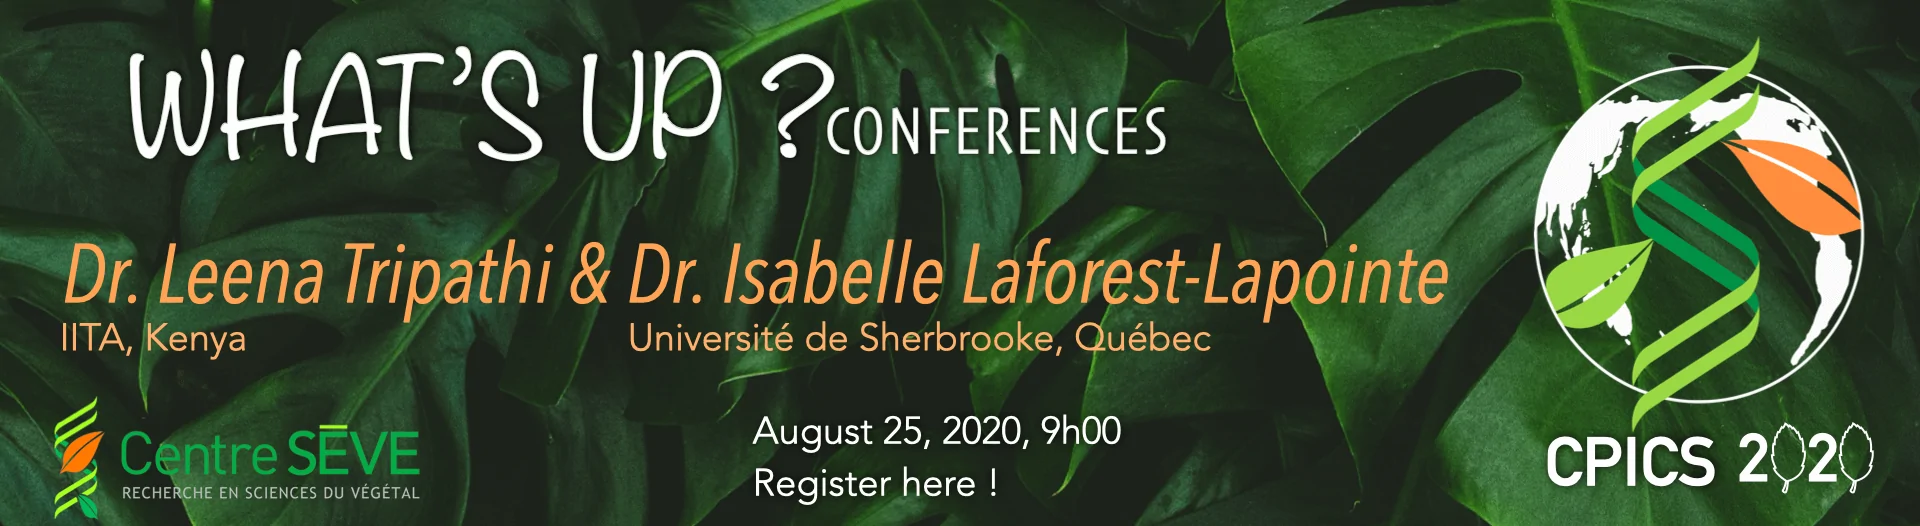 What's up conferences August 25<sup>th</sup> at 9h am with Dr. Leena Tripathi from IITA Kenya and Dr. Isabelle Laforest-Lapointe from University of Sherbrooke Canada